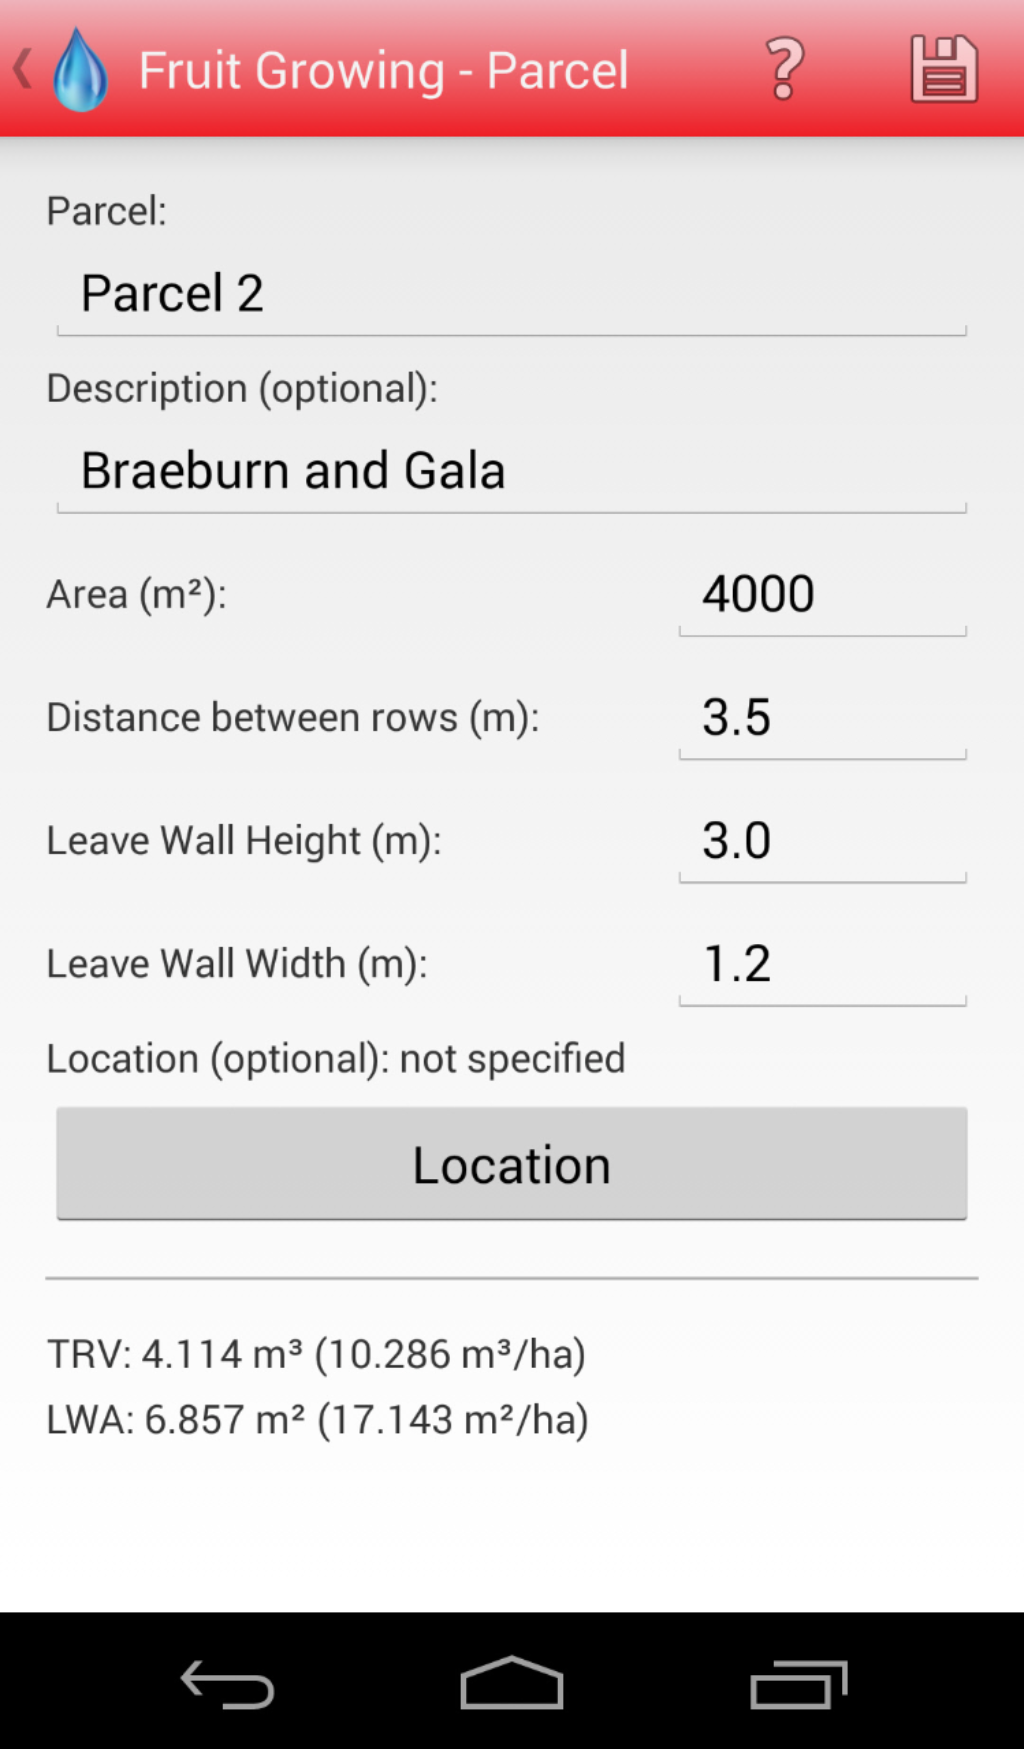 Android Spraycalculator Fruit Growing record parcel